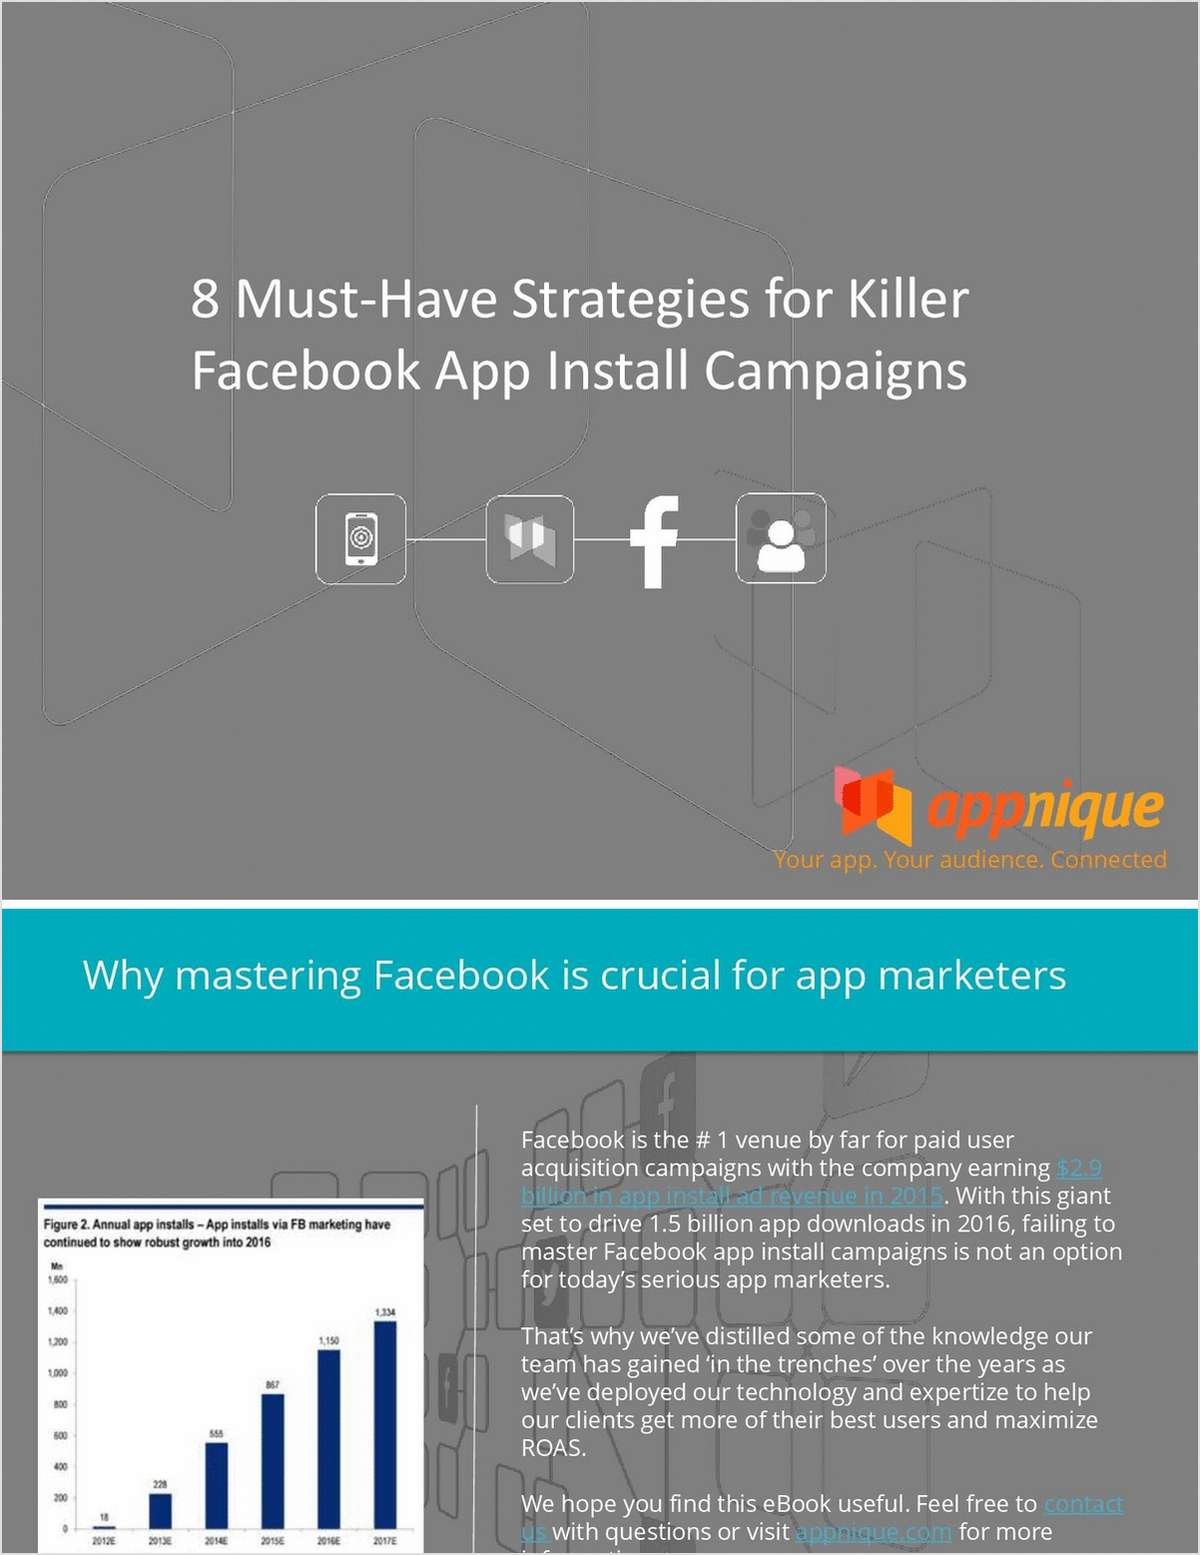 8 Must-Have Strategies for Killer Facebook App Install Campaigns